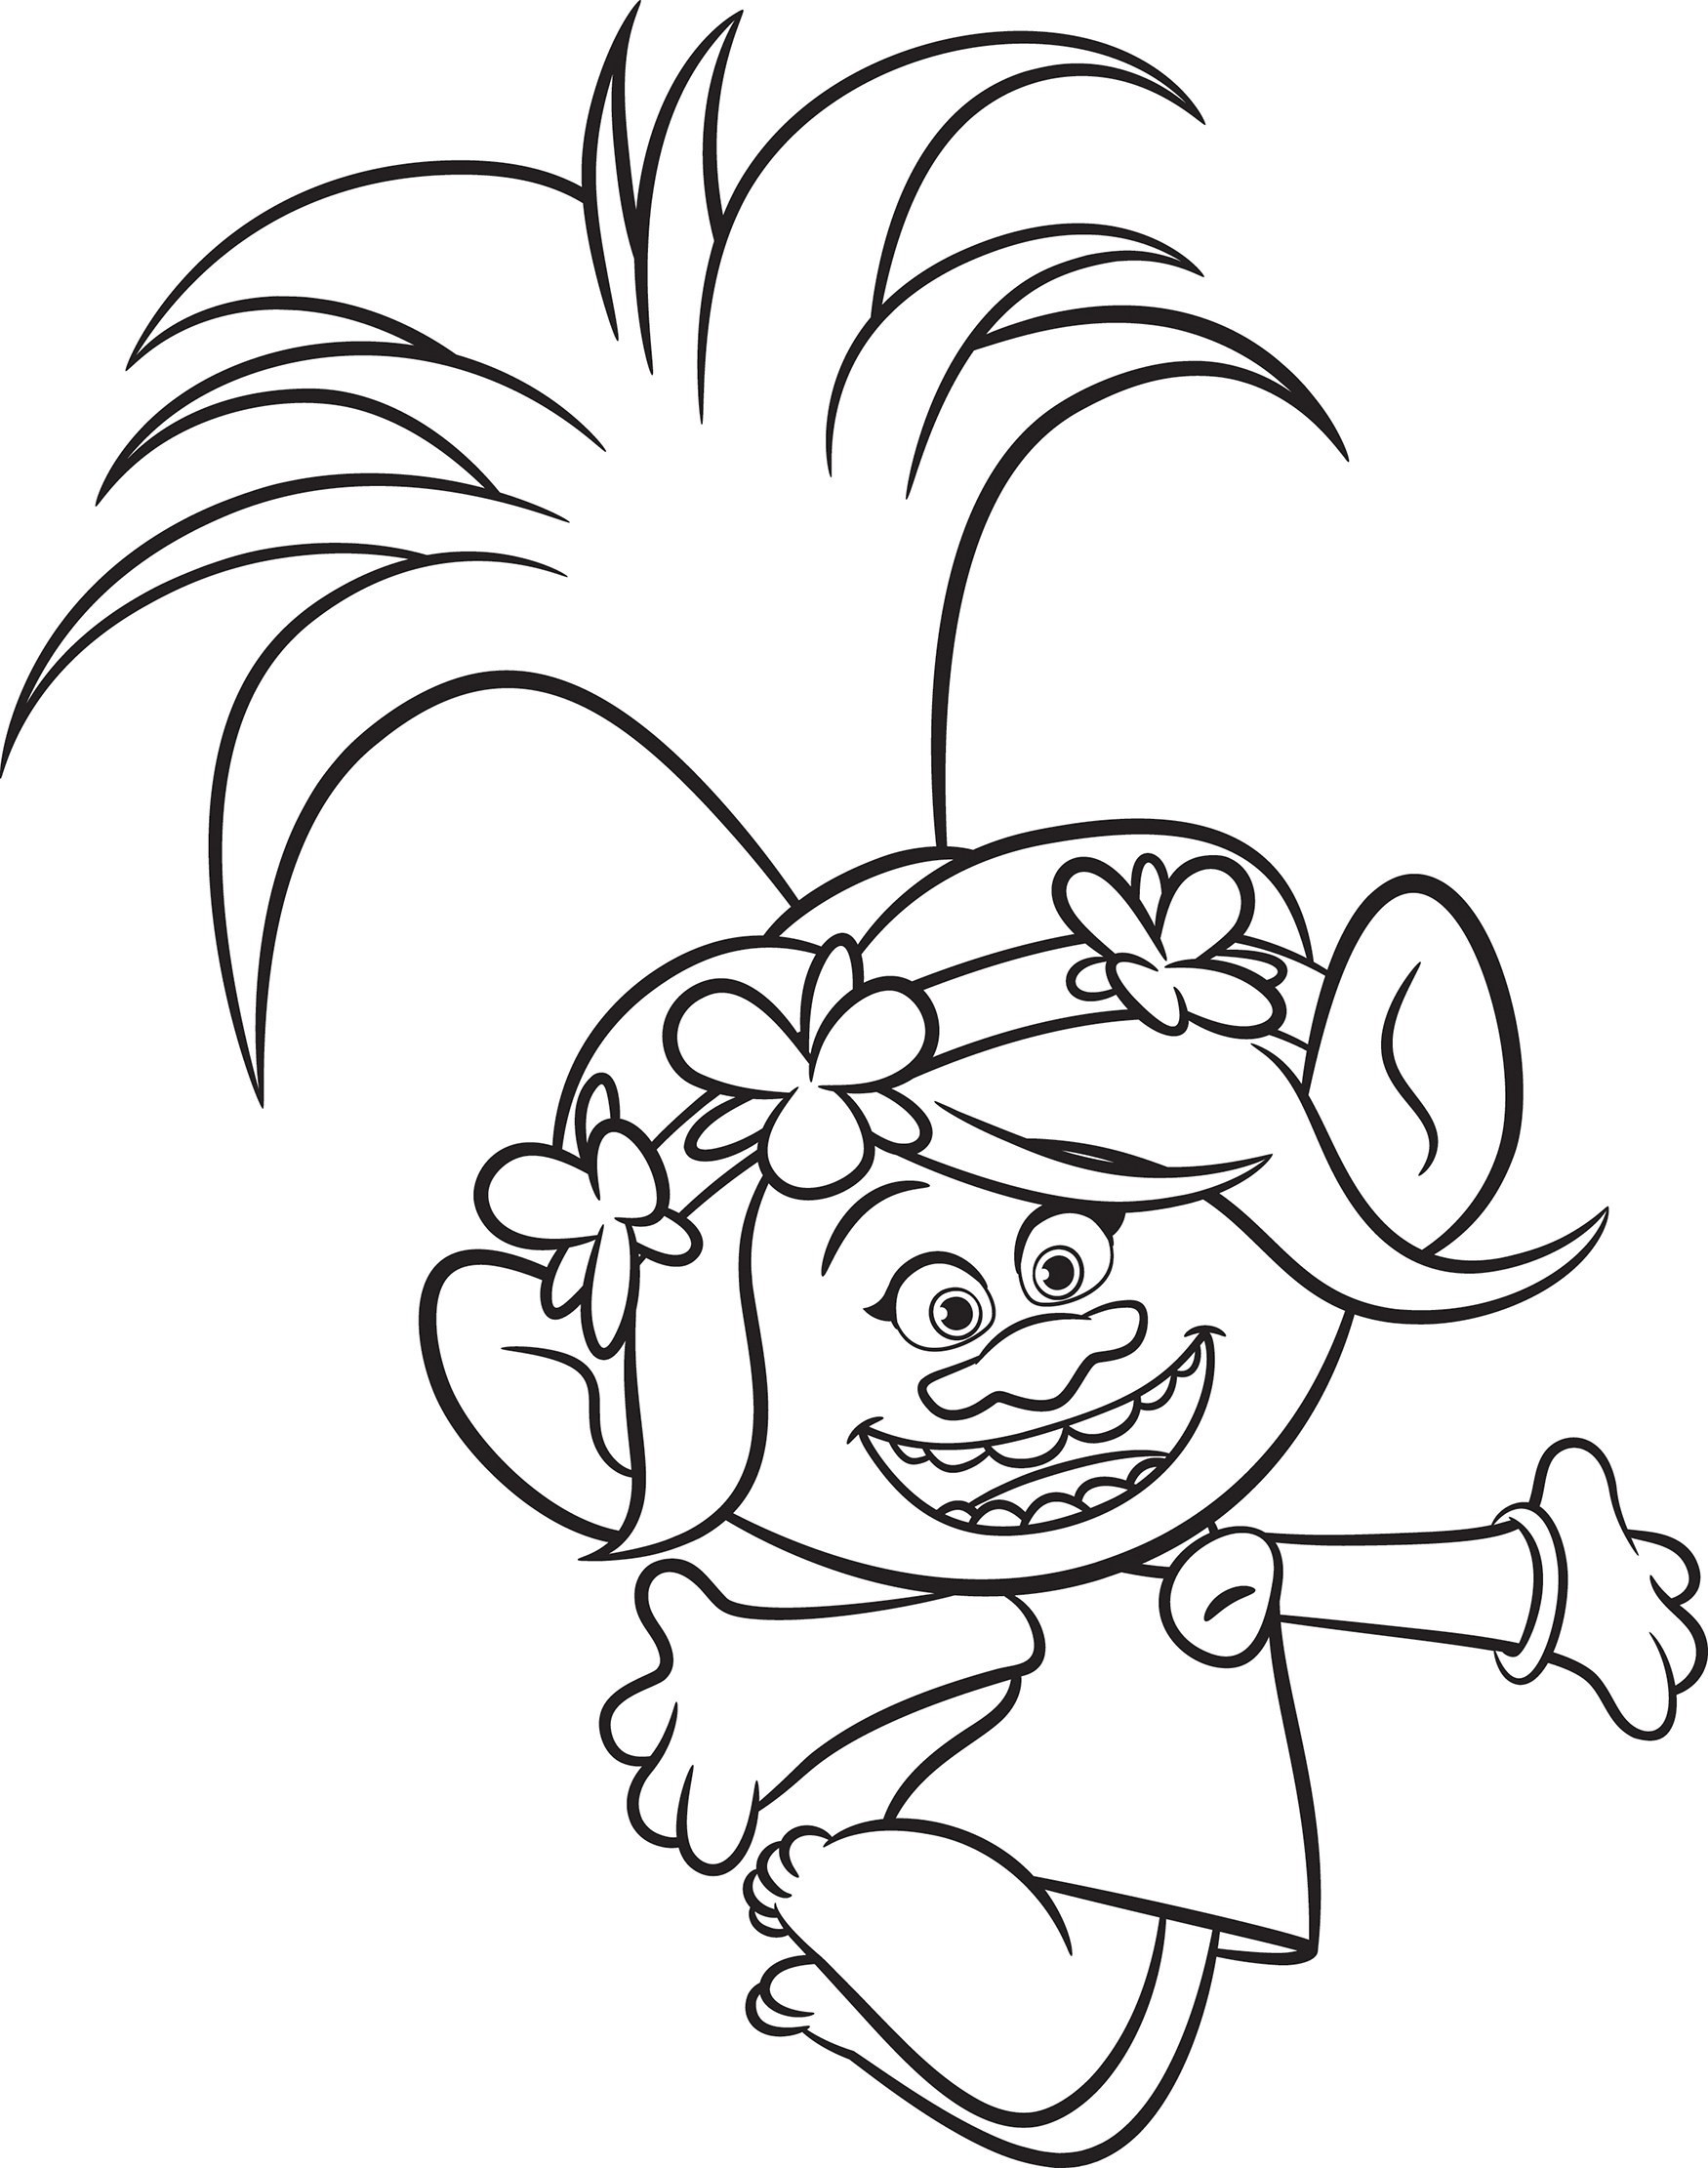 Free Dreamworks Trolls Coloring Pages